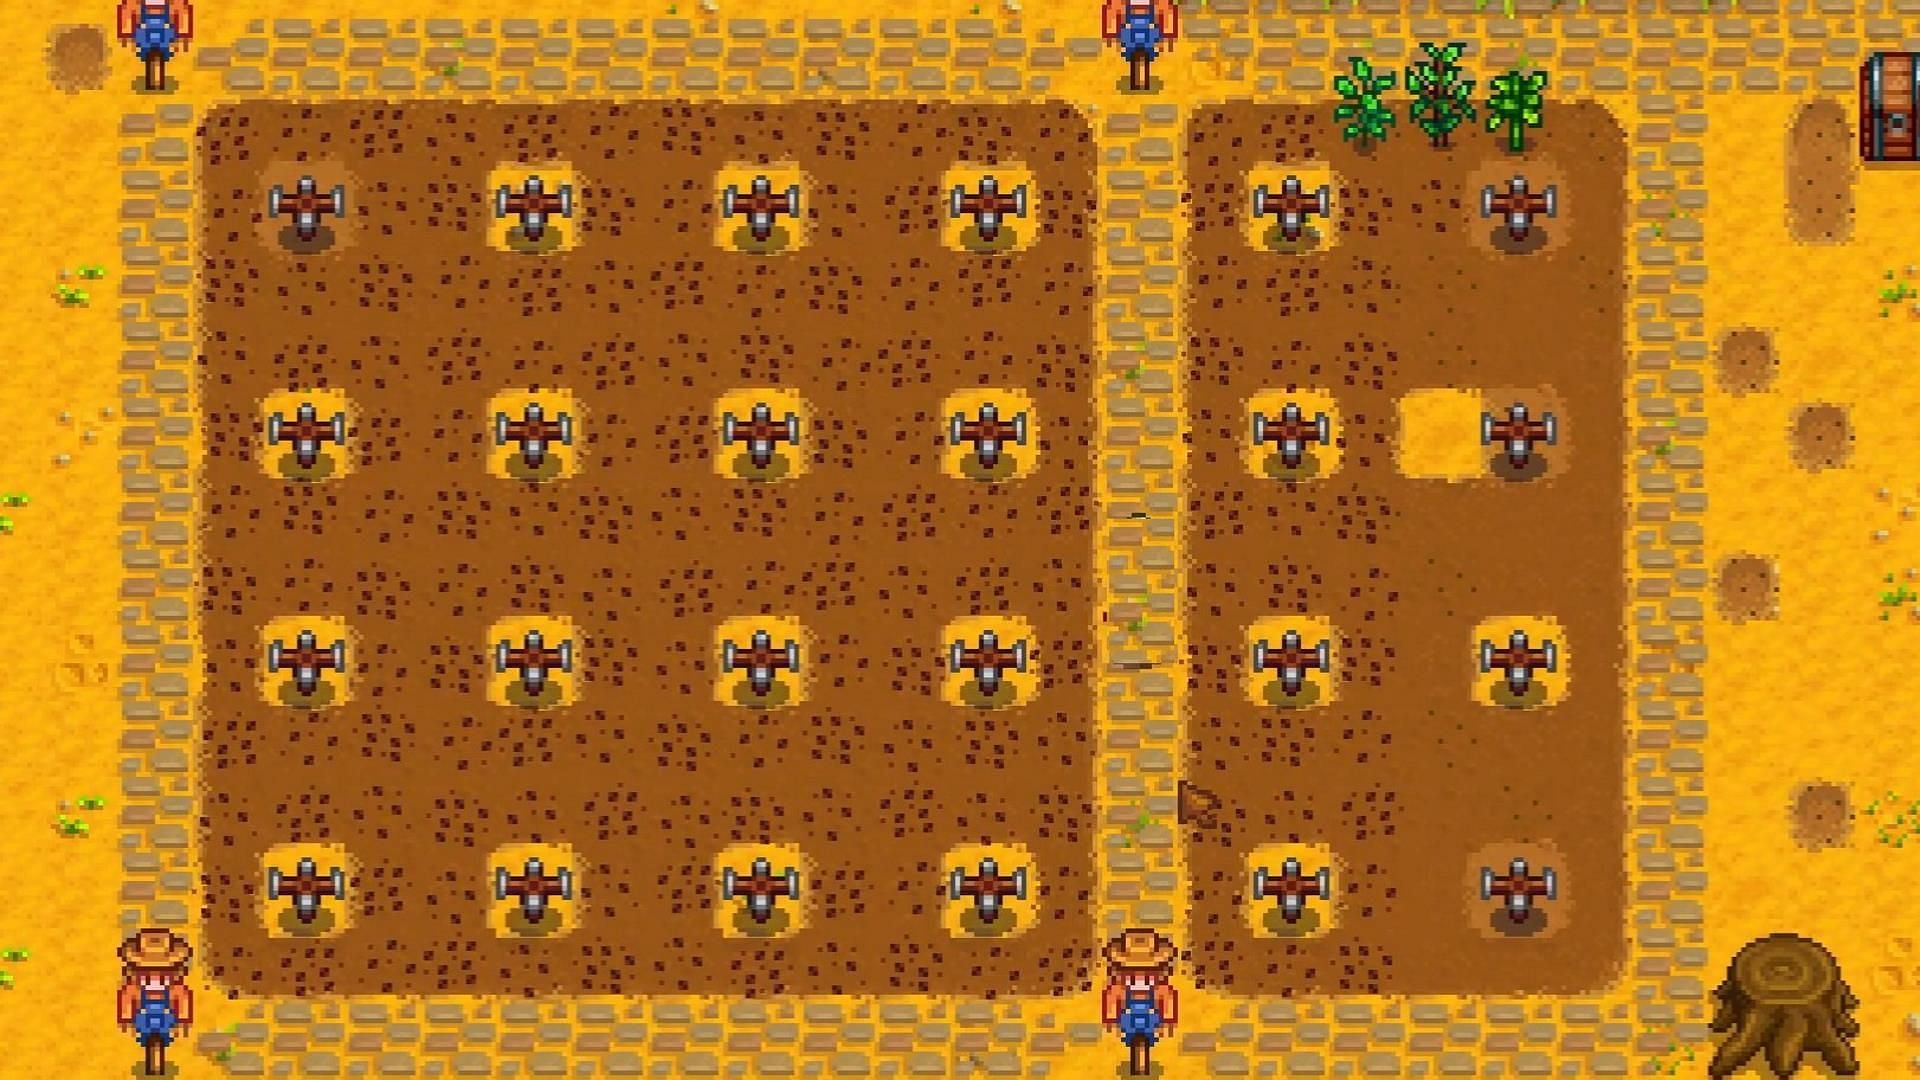 Place the specific type of Sprinkler efficiently to cover all the ground (Image via ConcernedApe)